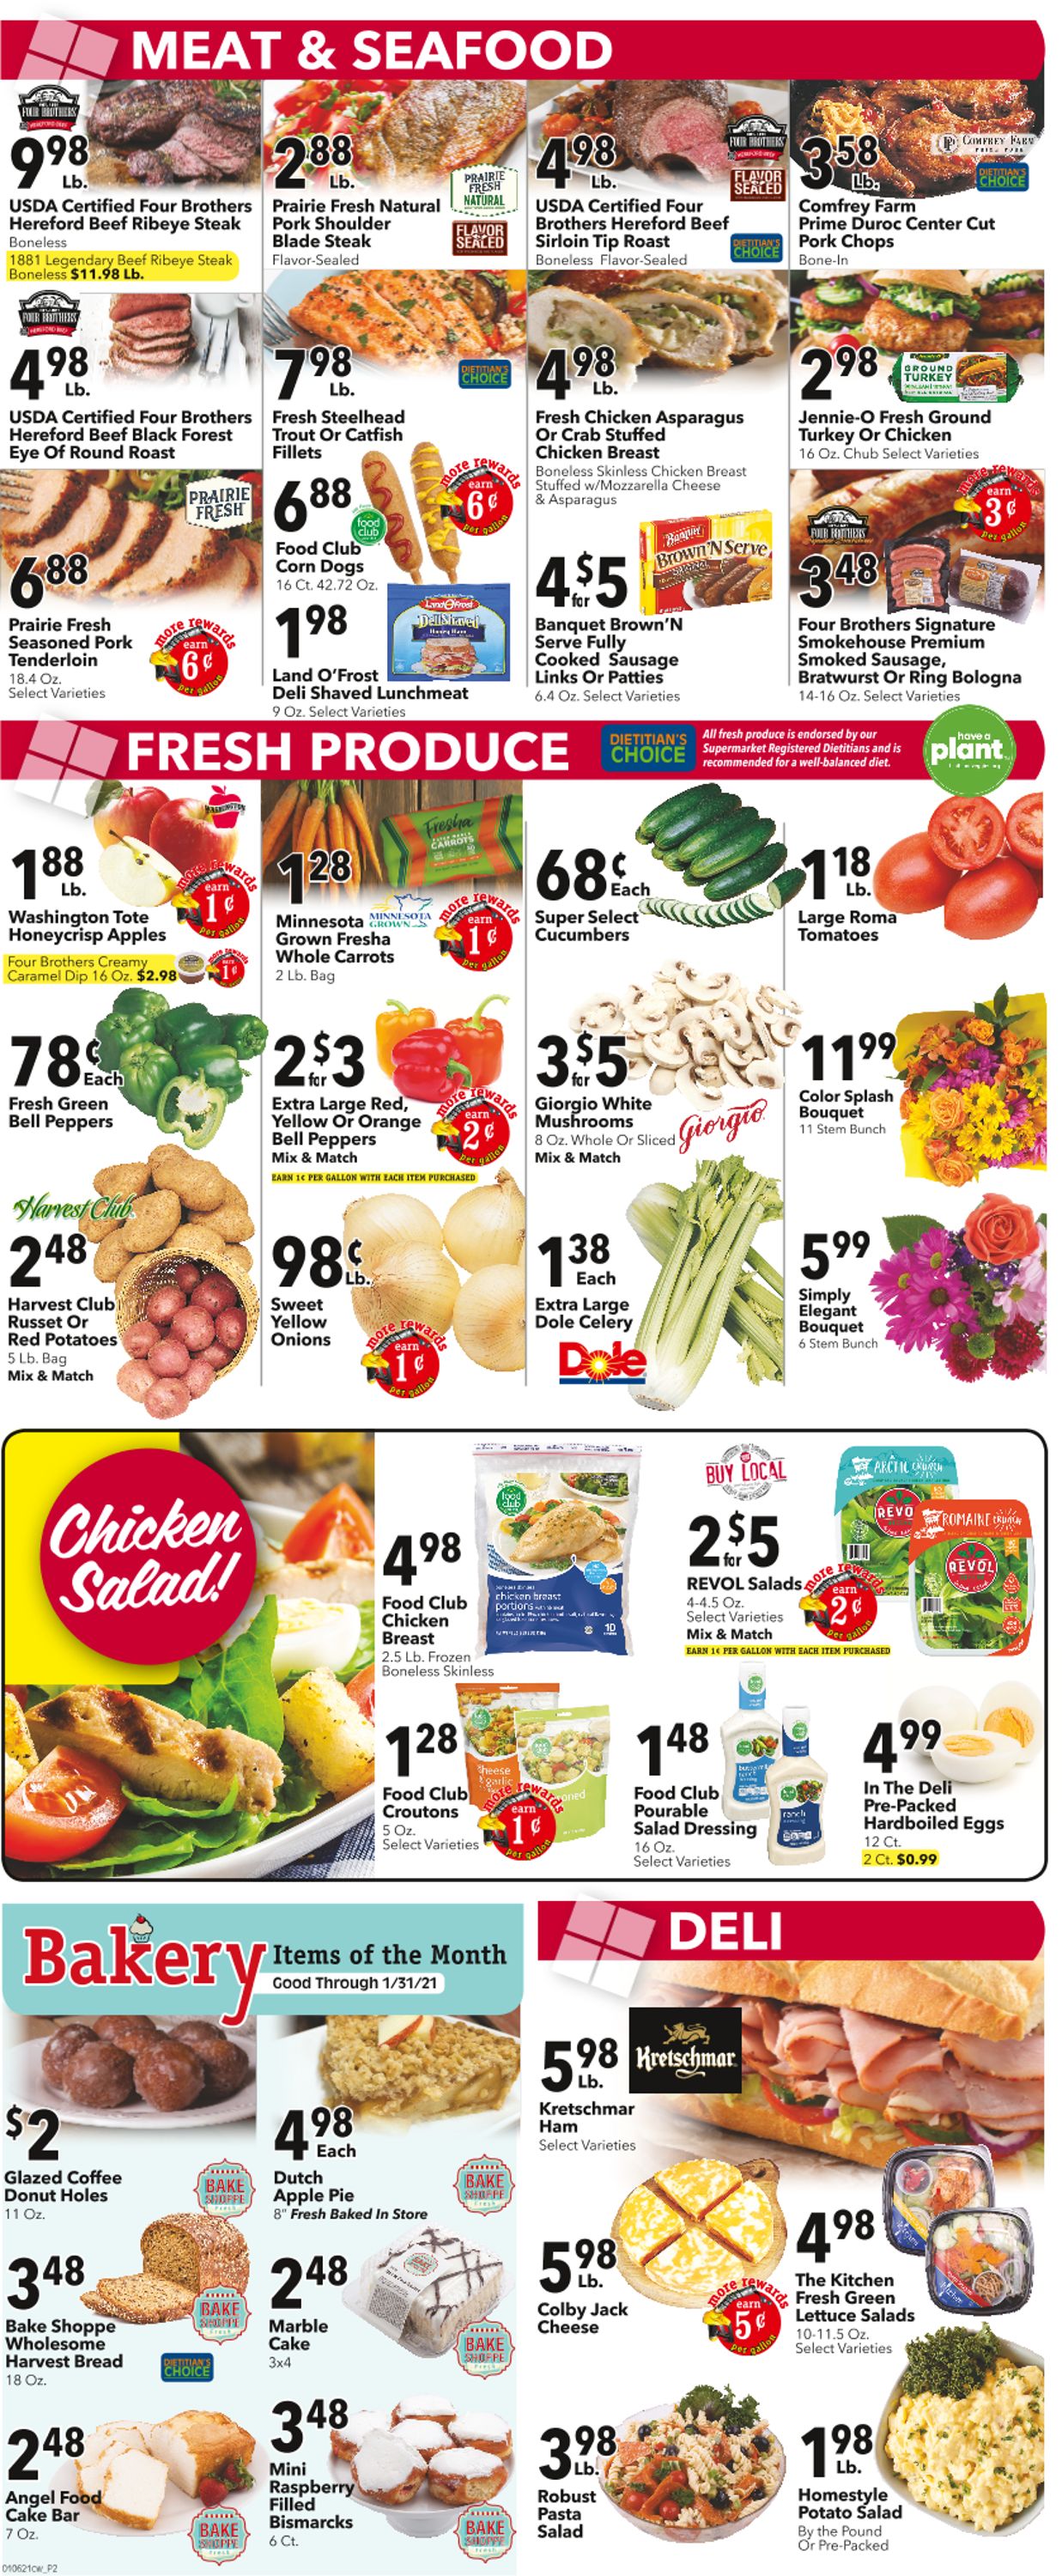 Cash Wise Weekly Ad Circular - valid 01/06-01/12/2021 (Page 2)